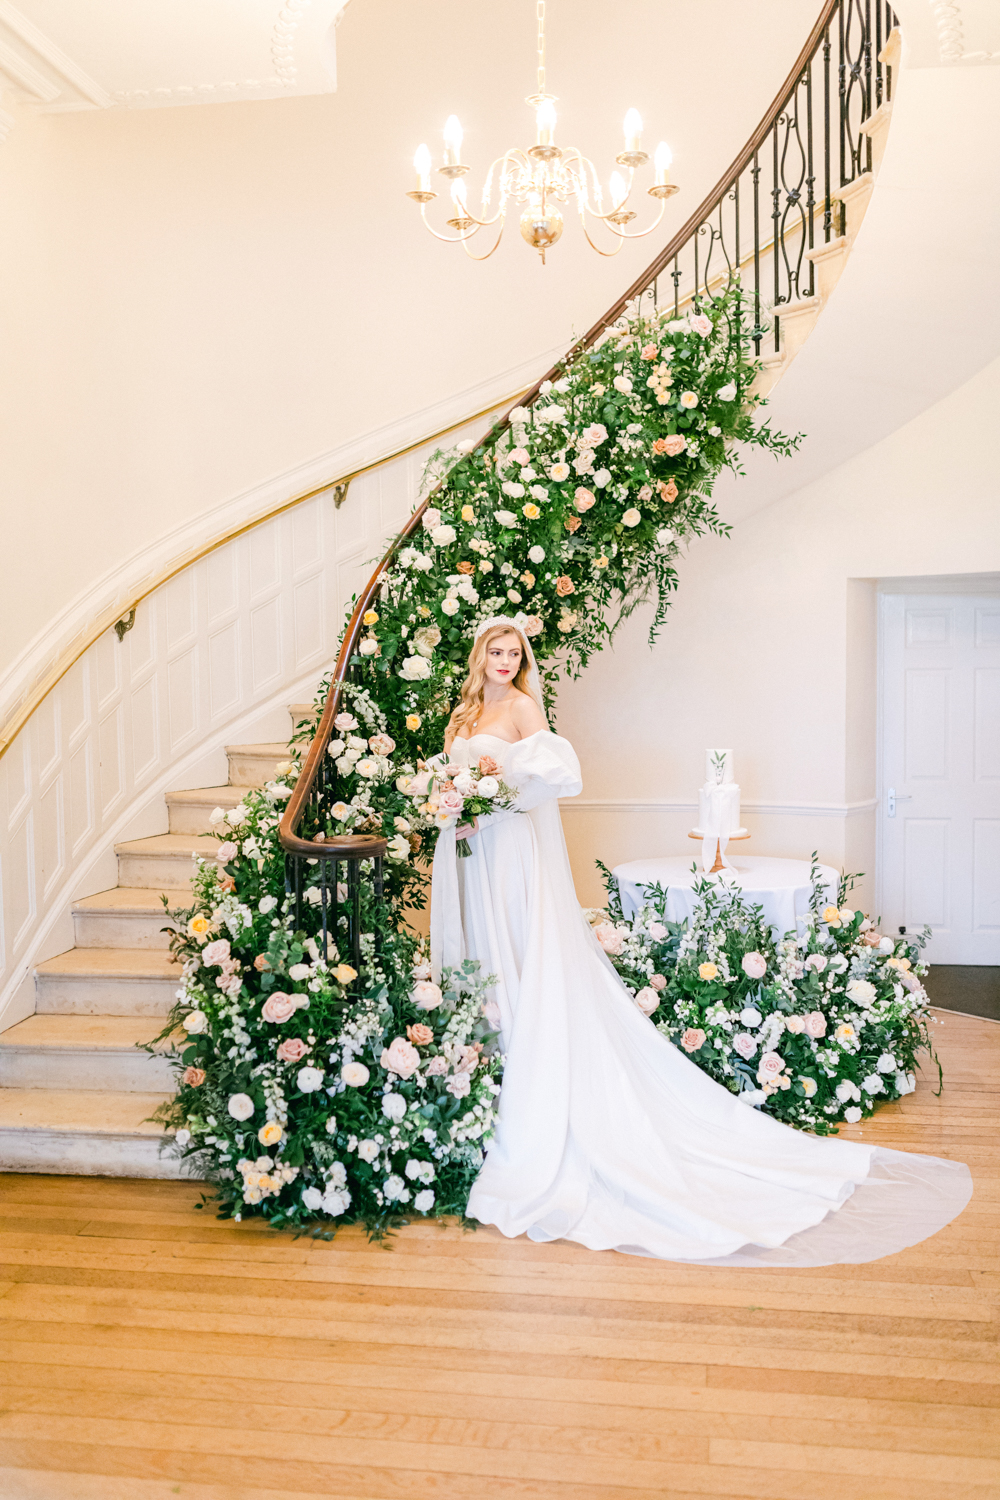 Luxury Wedding flowers adorn the whole staircase at Eastington Park